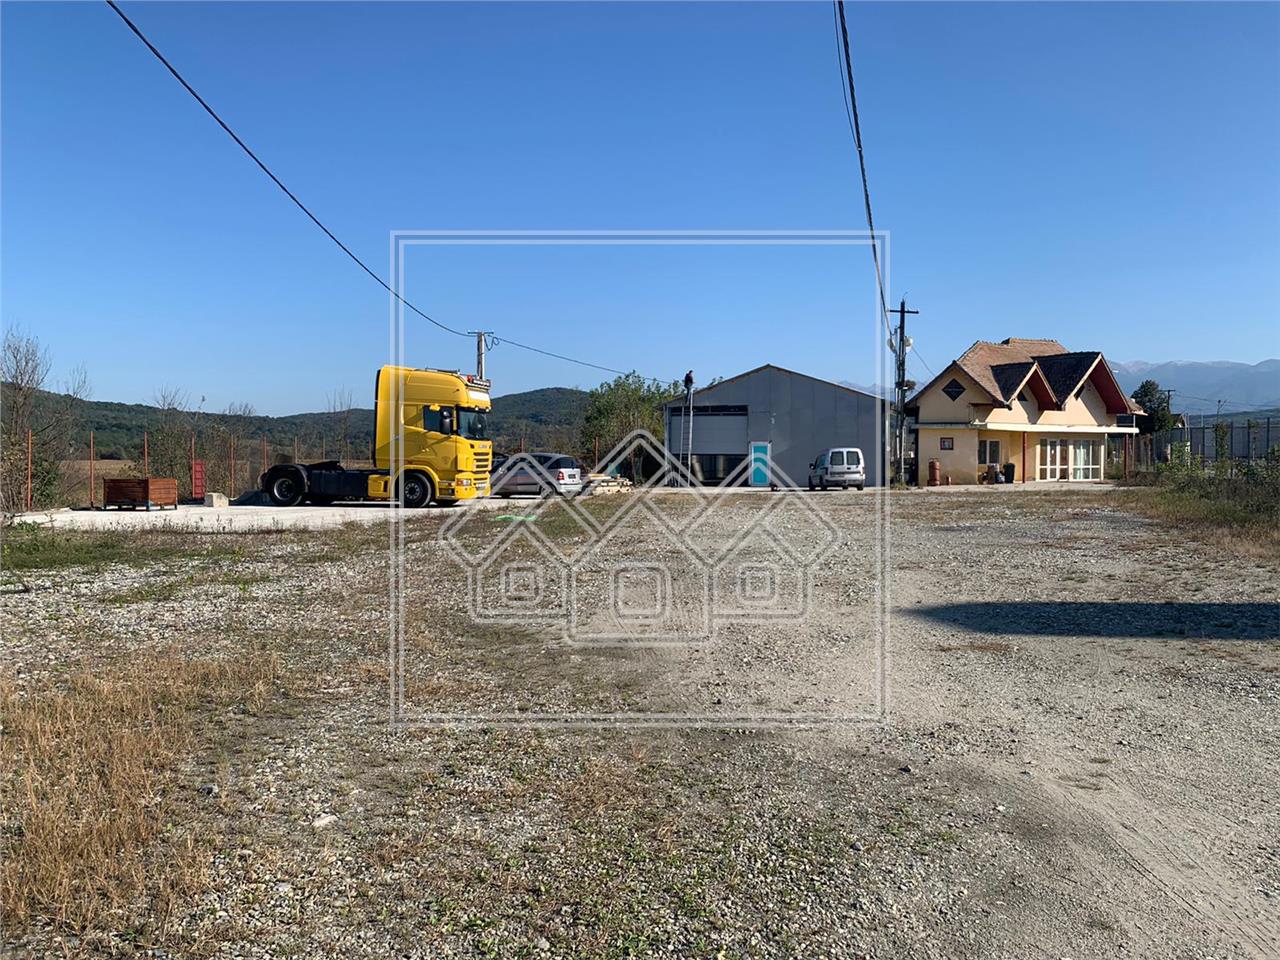 Industrial for rent in Sibiu